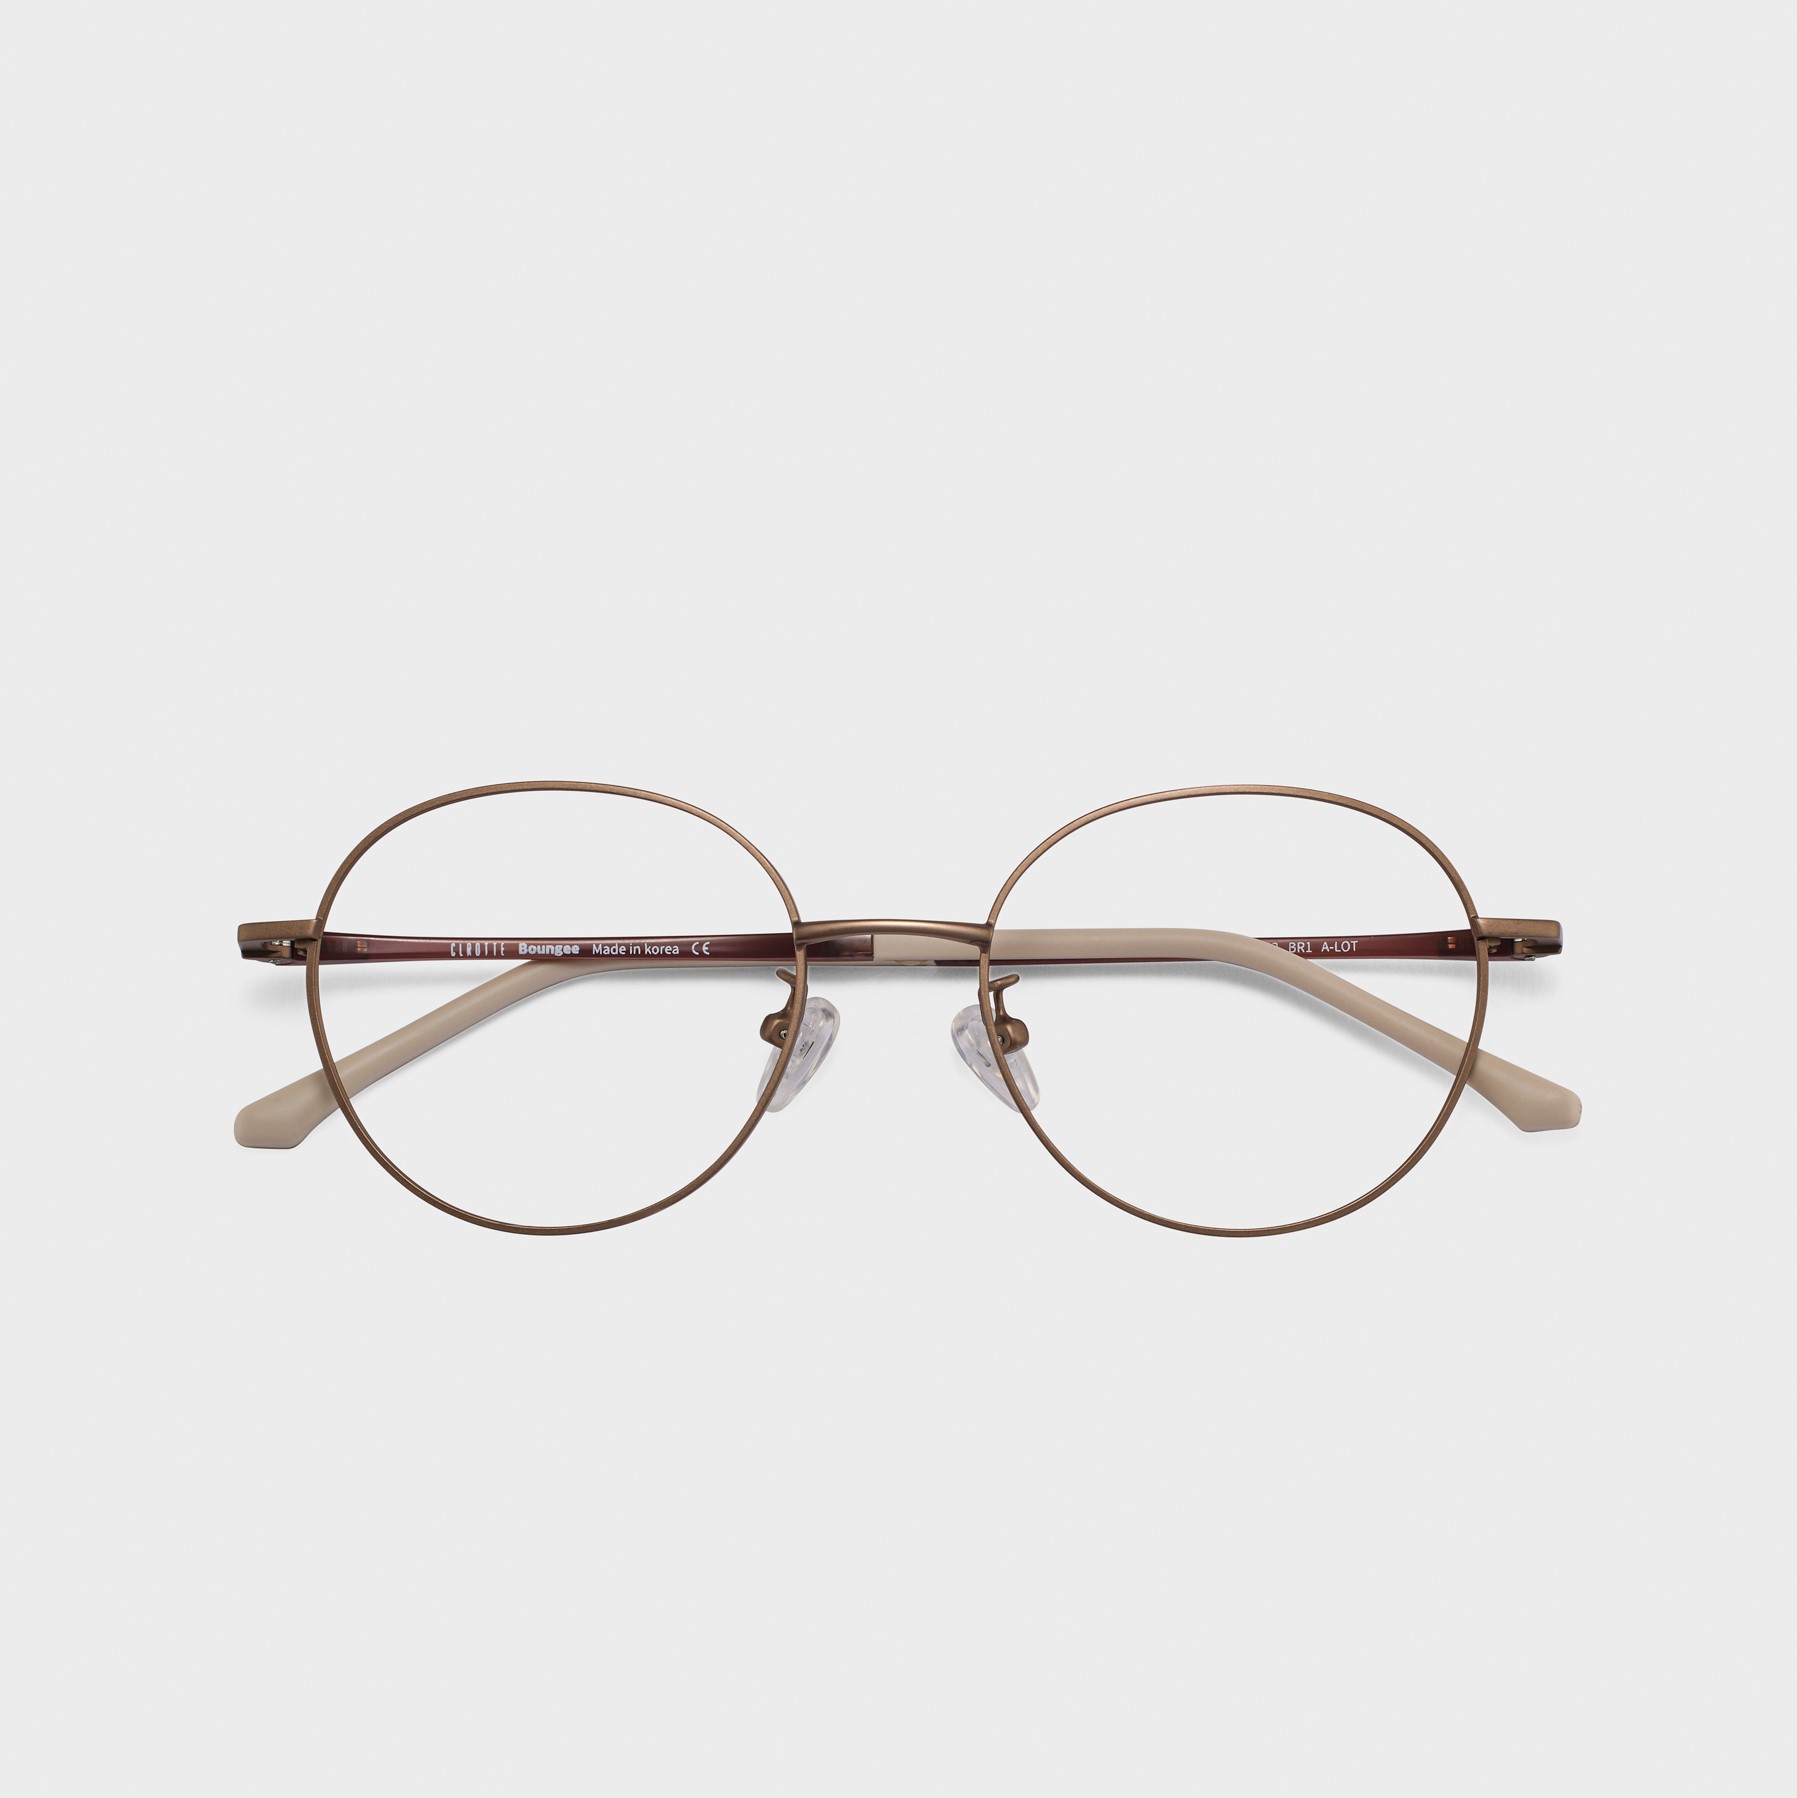 _CLROTTE_ Eyewear Glasses_ Boungee